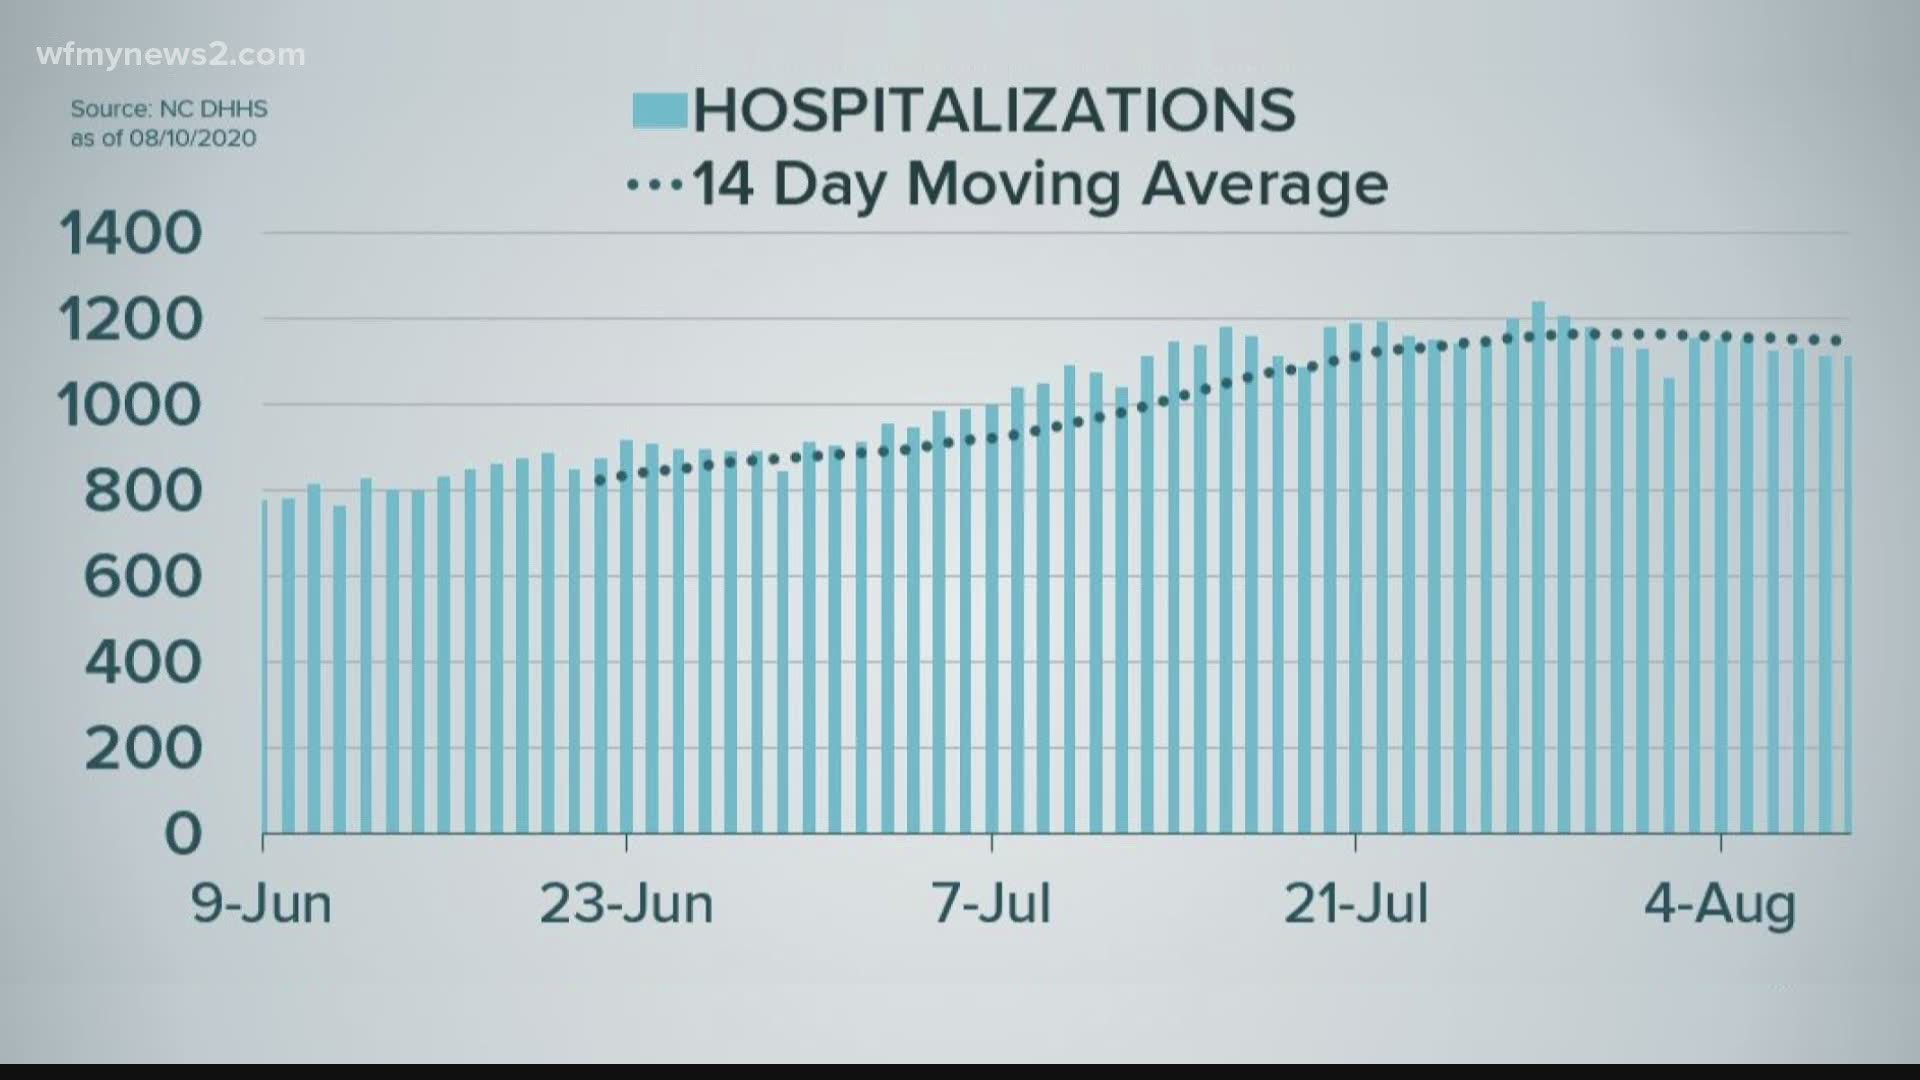 NC DHHS hospitalizations increased from June through July but started to flatten in August.